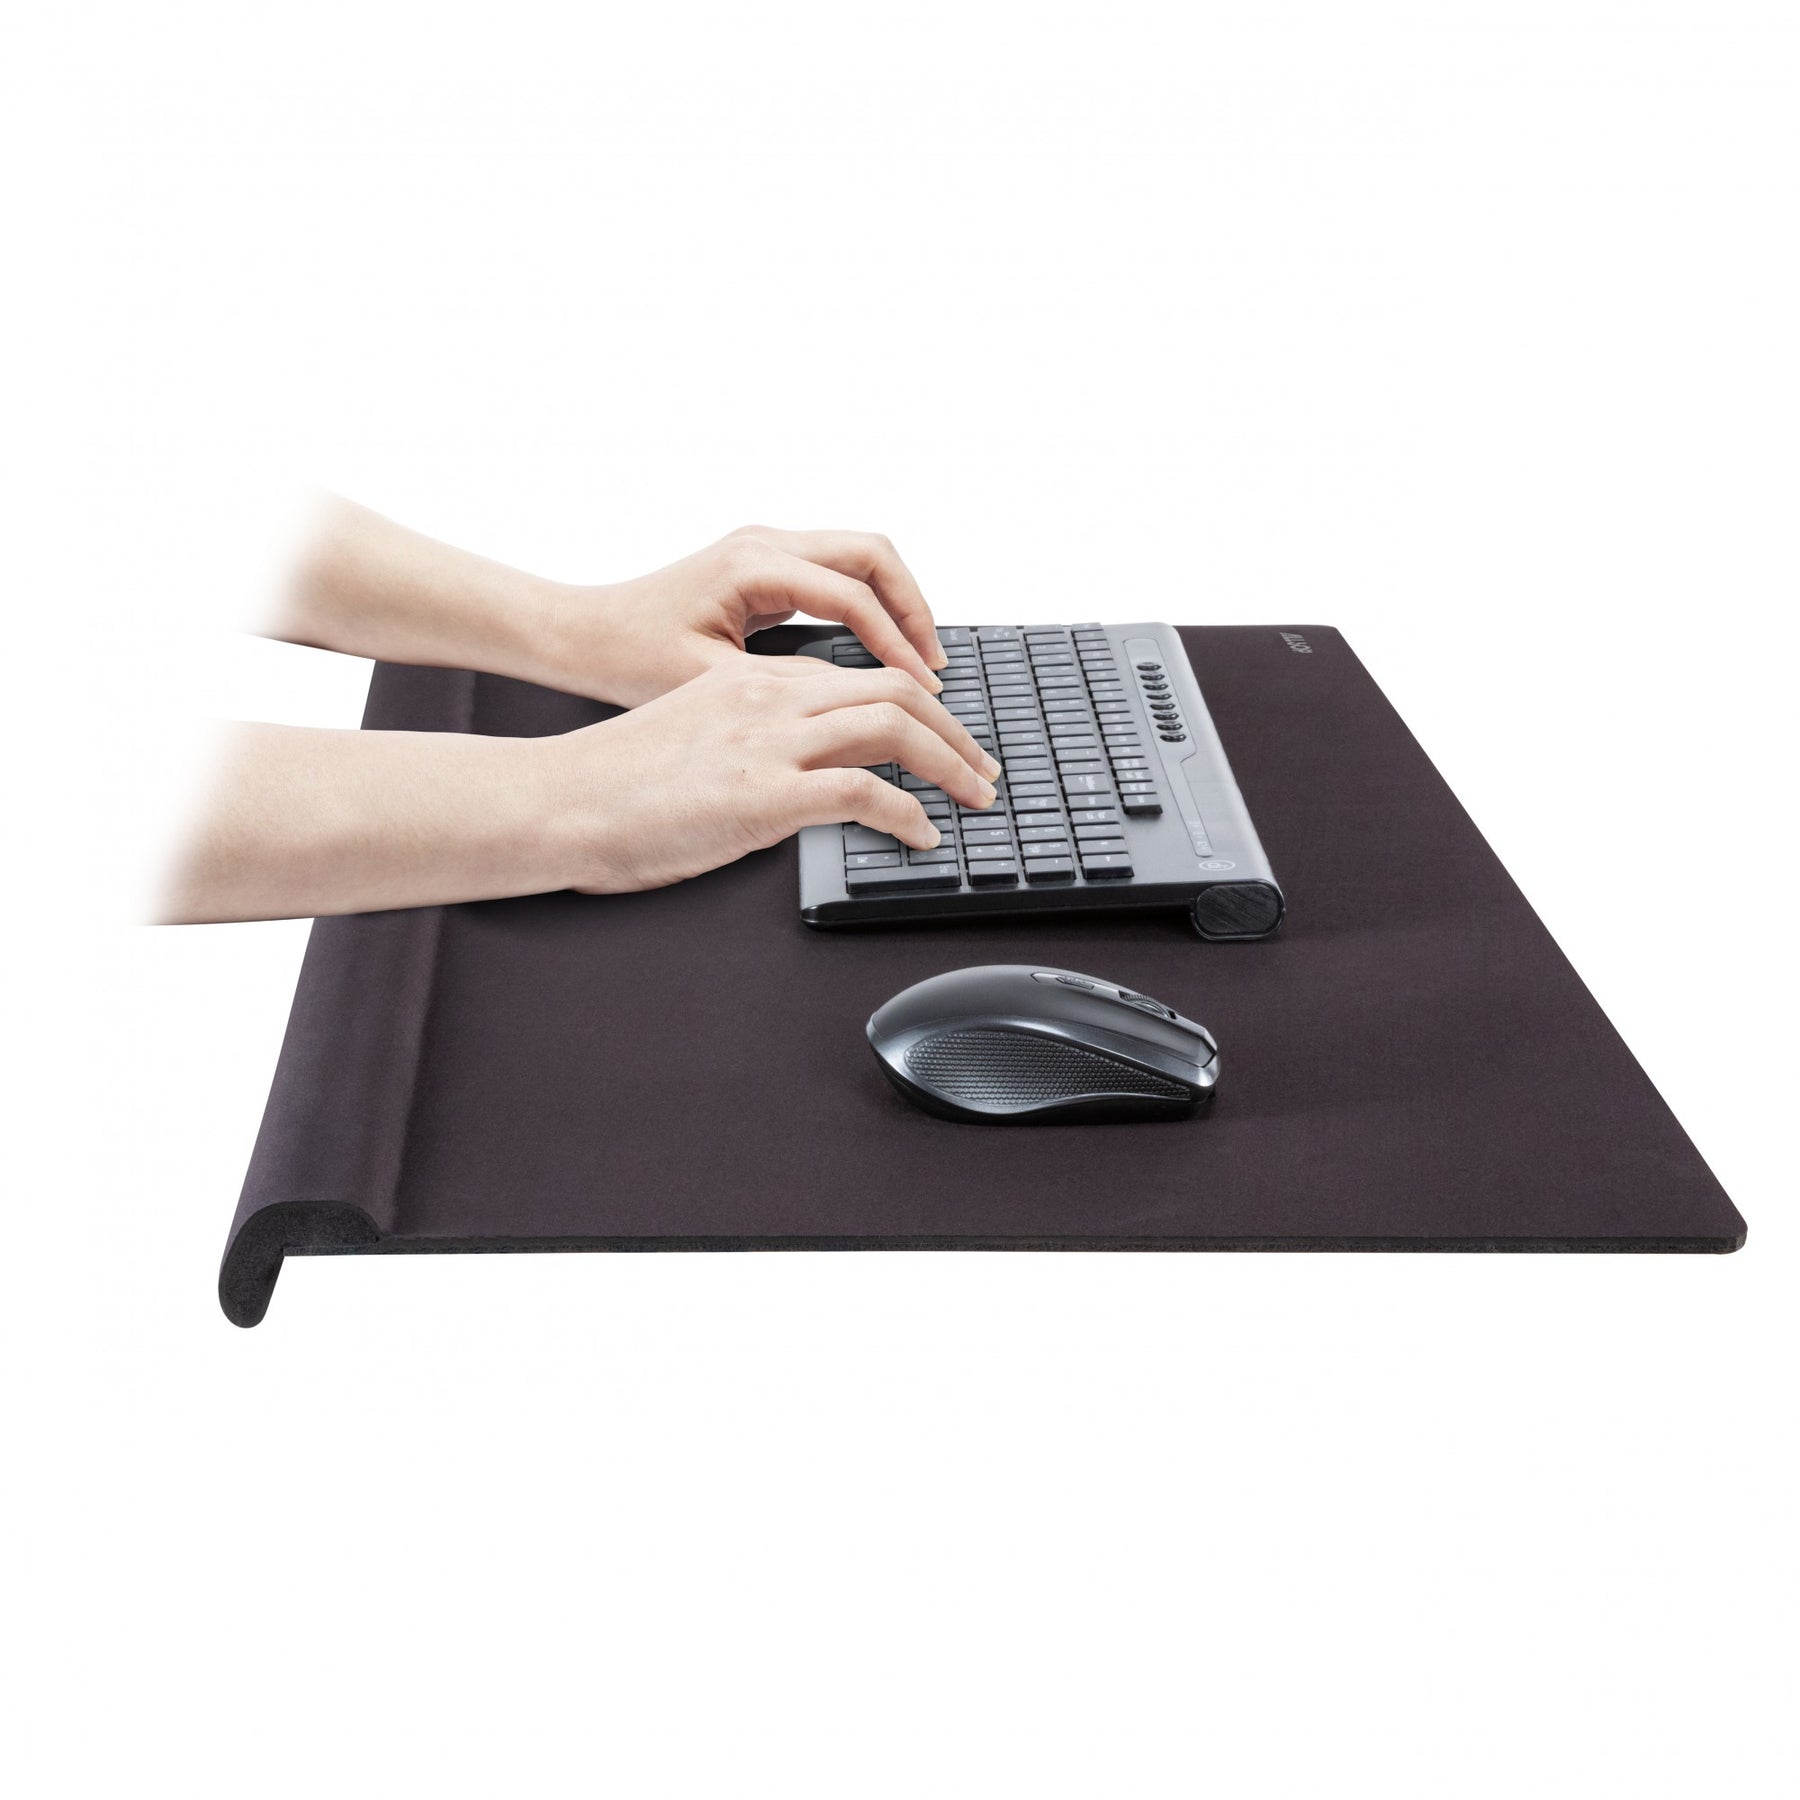 Giant Mousepad / Deskpad with Cushioned Wrist Rest Edge and Mousing Su –  AllsopTech